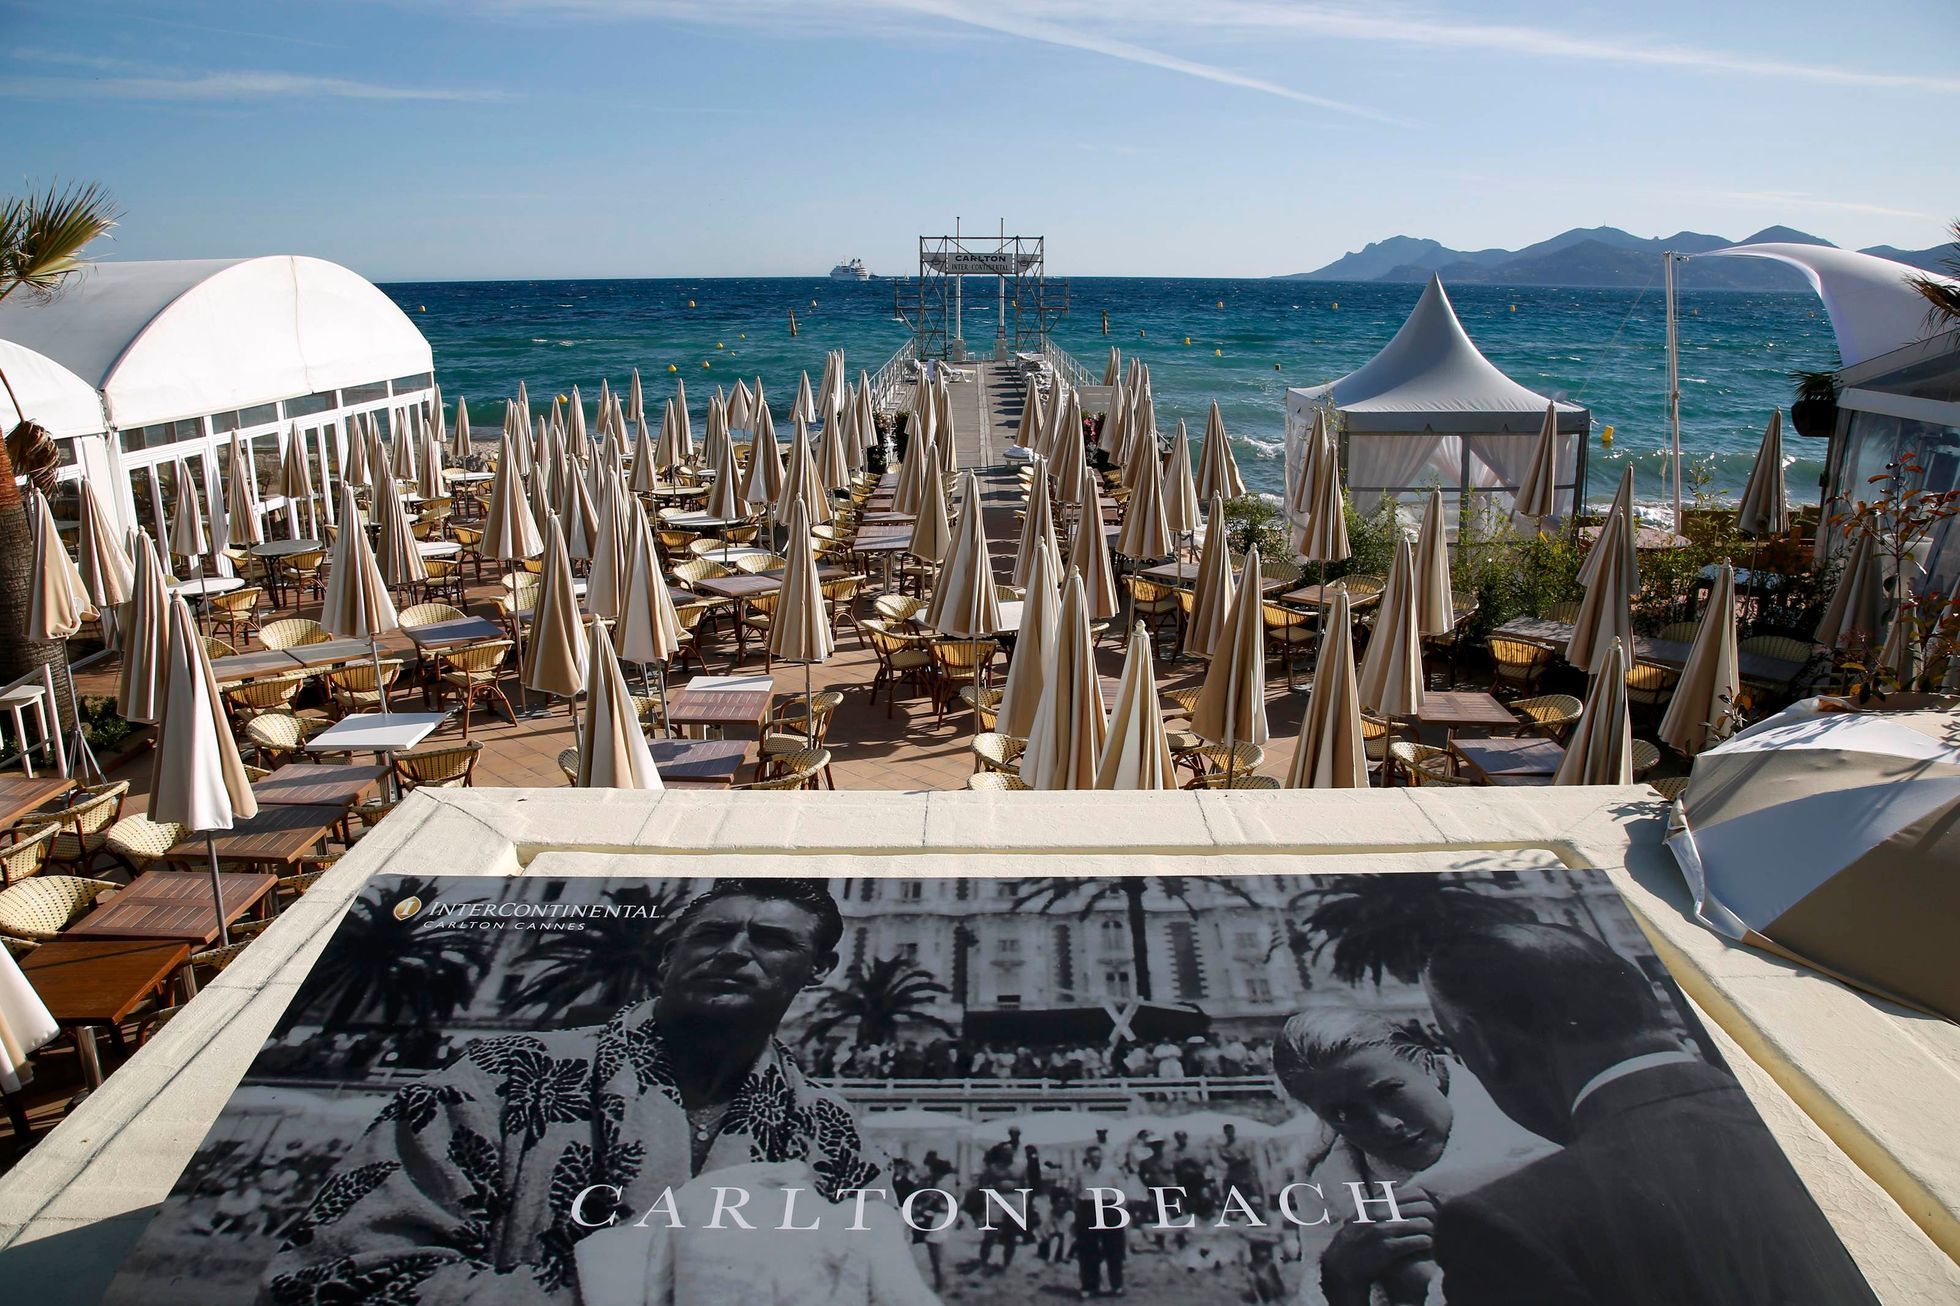 View of the Carlton Hotel pier as preparations continue ahead of the 67th Cannes Film Festival in Cannes